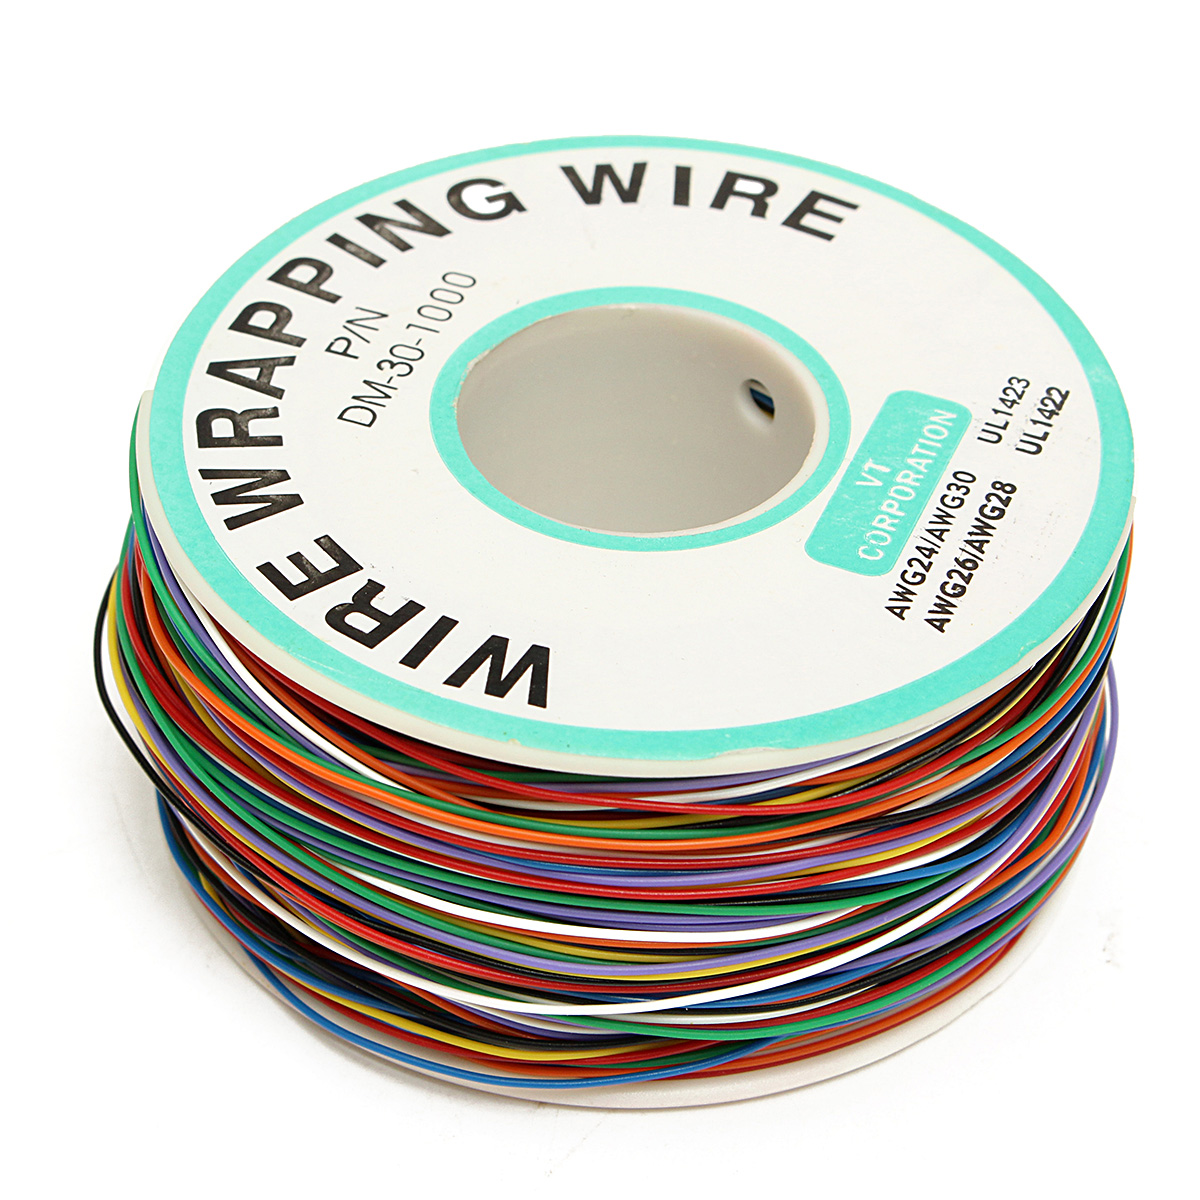 DANIU-250M-8-Wire-Colored-Insulated-PN-B-30-1000-30AWG-Wire-Wrapping-Cable-Wrap-Reel-1081298-2